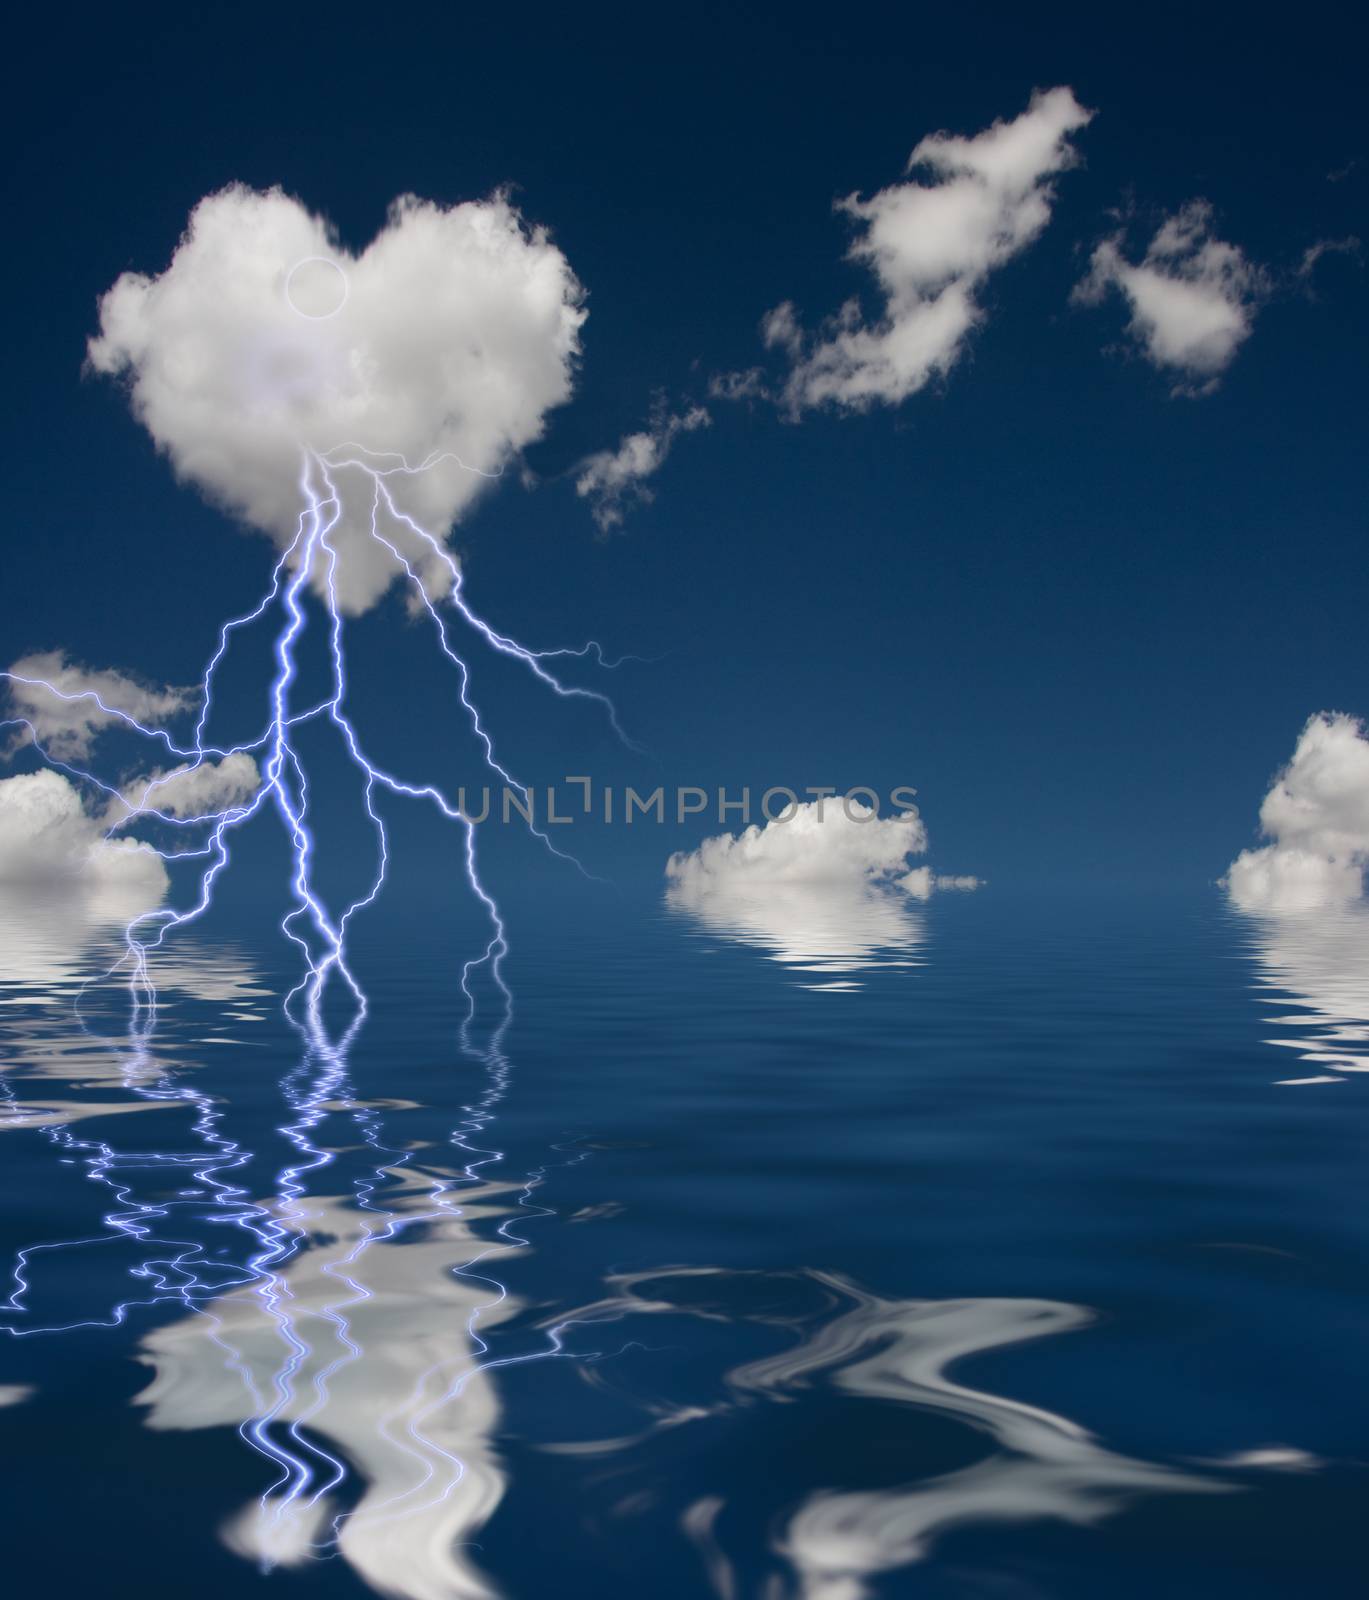 Heart Shaped Cloud With Thunderbolt and Reflection on Water